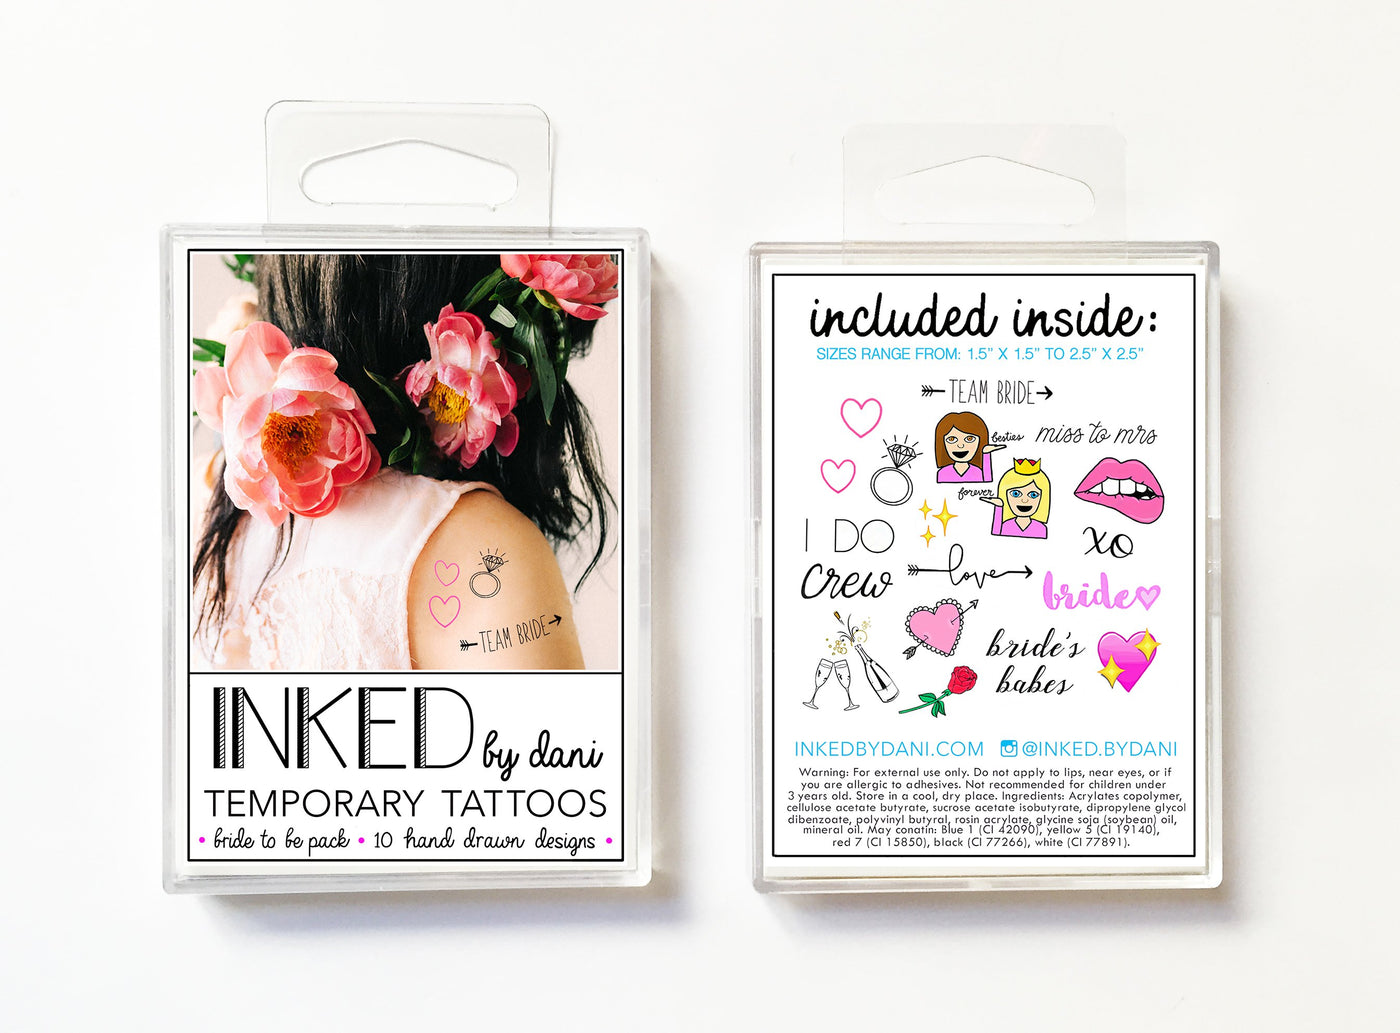 Bride to be tattoo pack containing an assortment of bridal tattoos